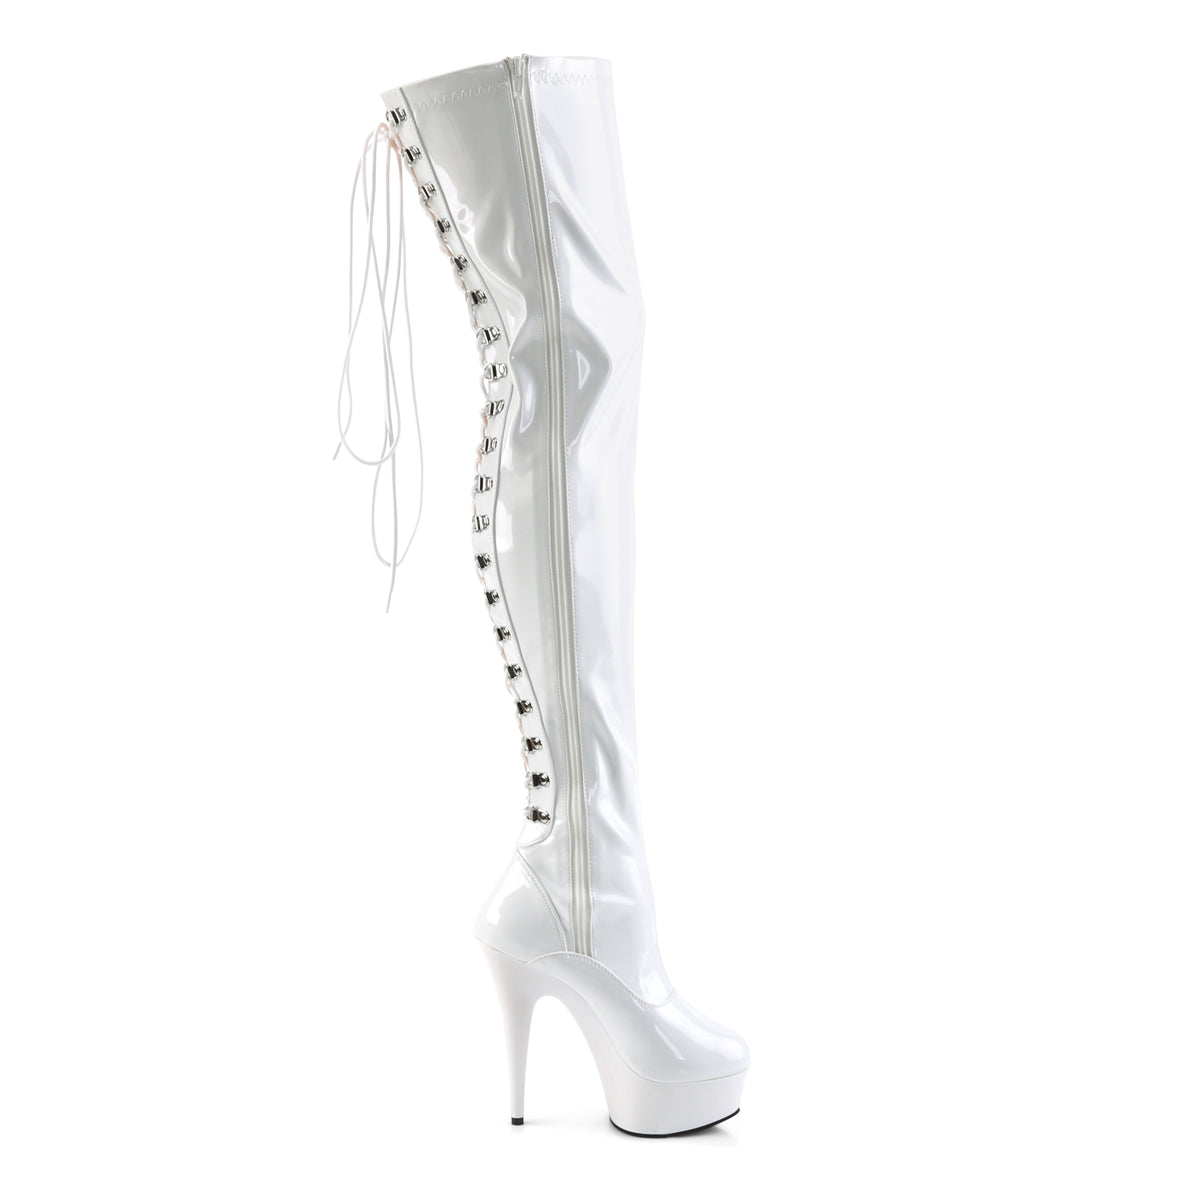 DELIGHT-3063 6 Inch Heel White Patent Pole Dancing Platforms-Pleaser- Sexy Shoes Fetish Heels